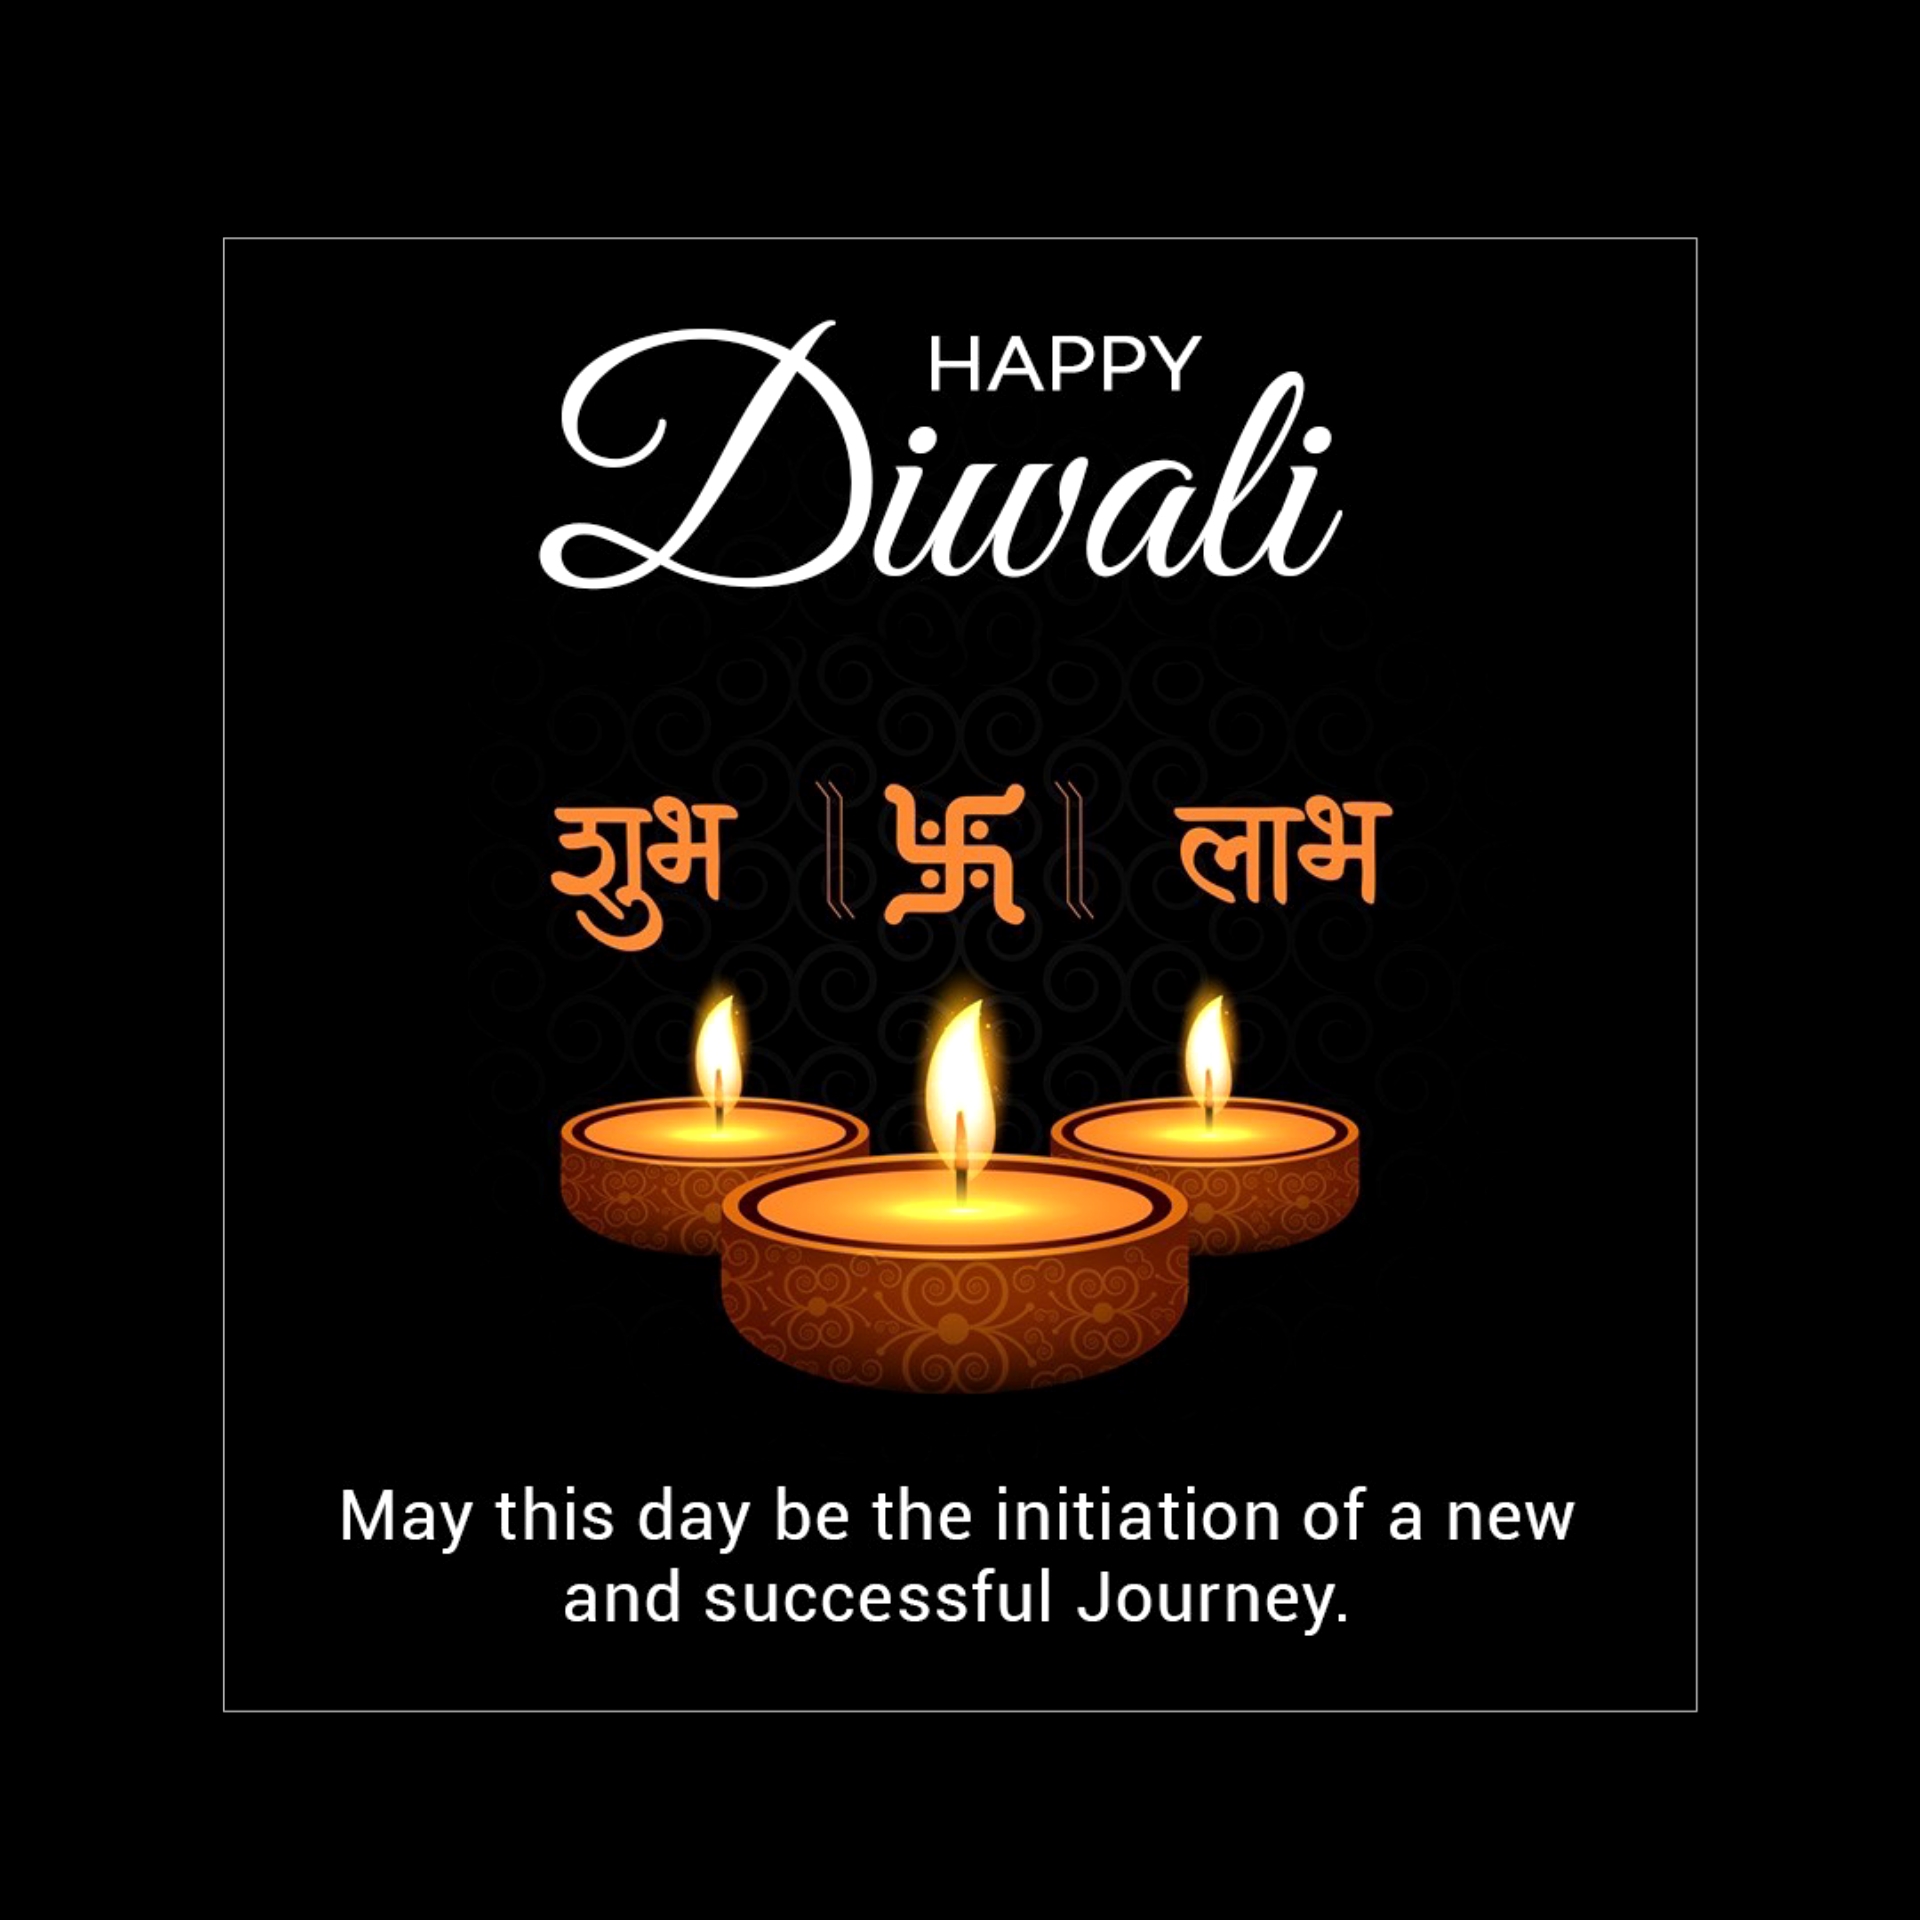 HD Wishes Happy Diwali Images